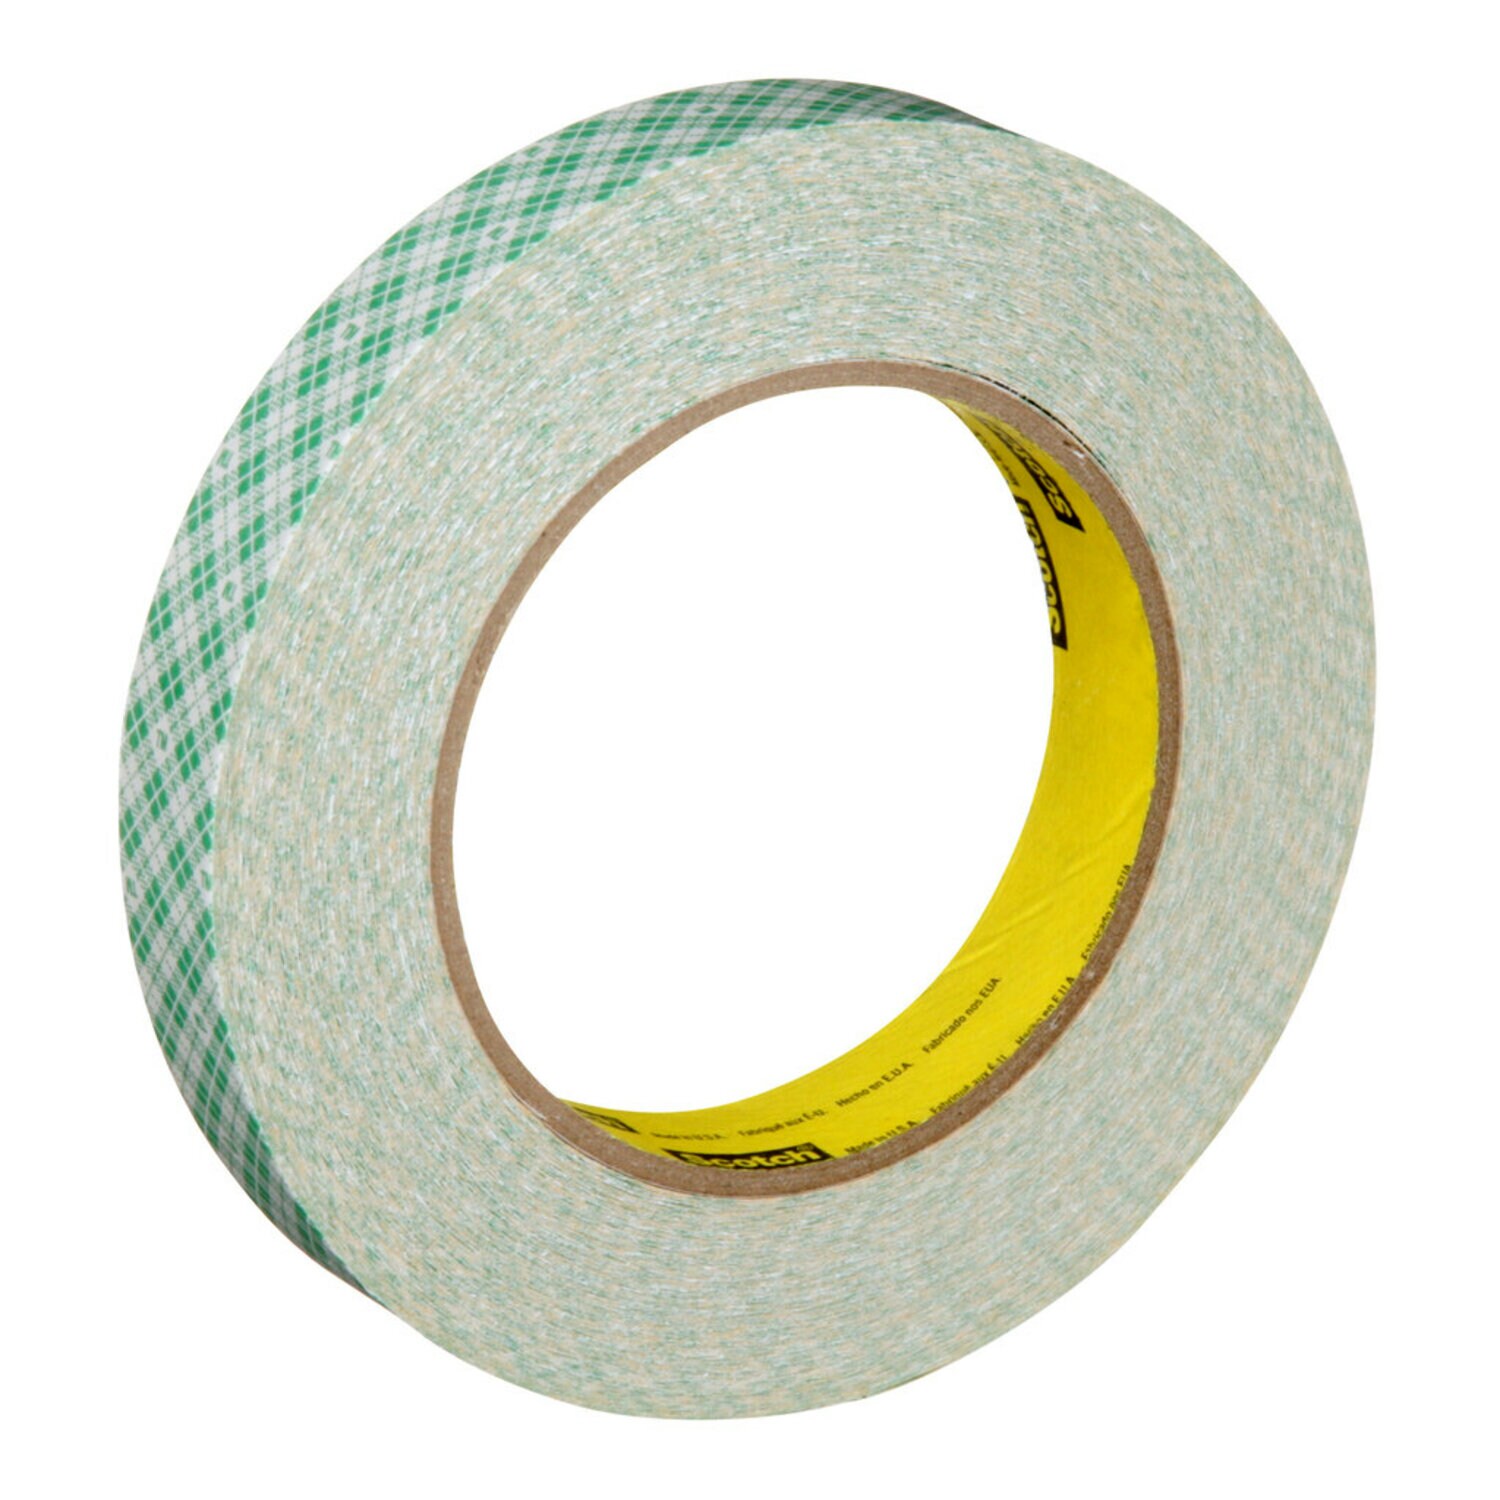 3M Micropore Tape - White - .5 inch x 10 yds - 1 Each